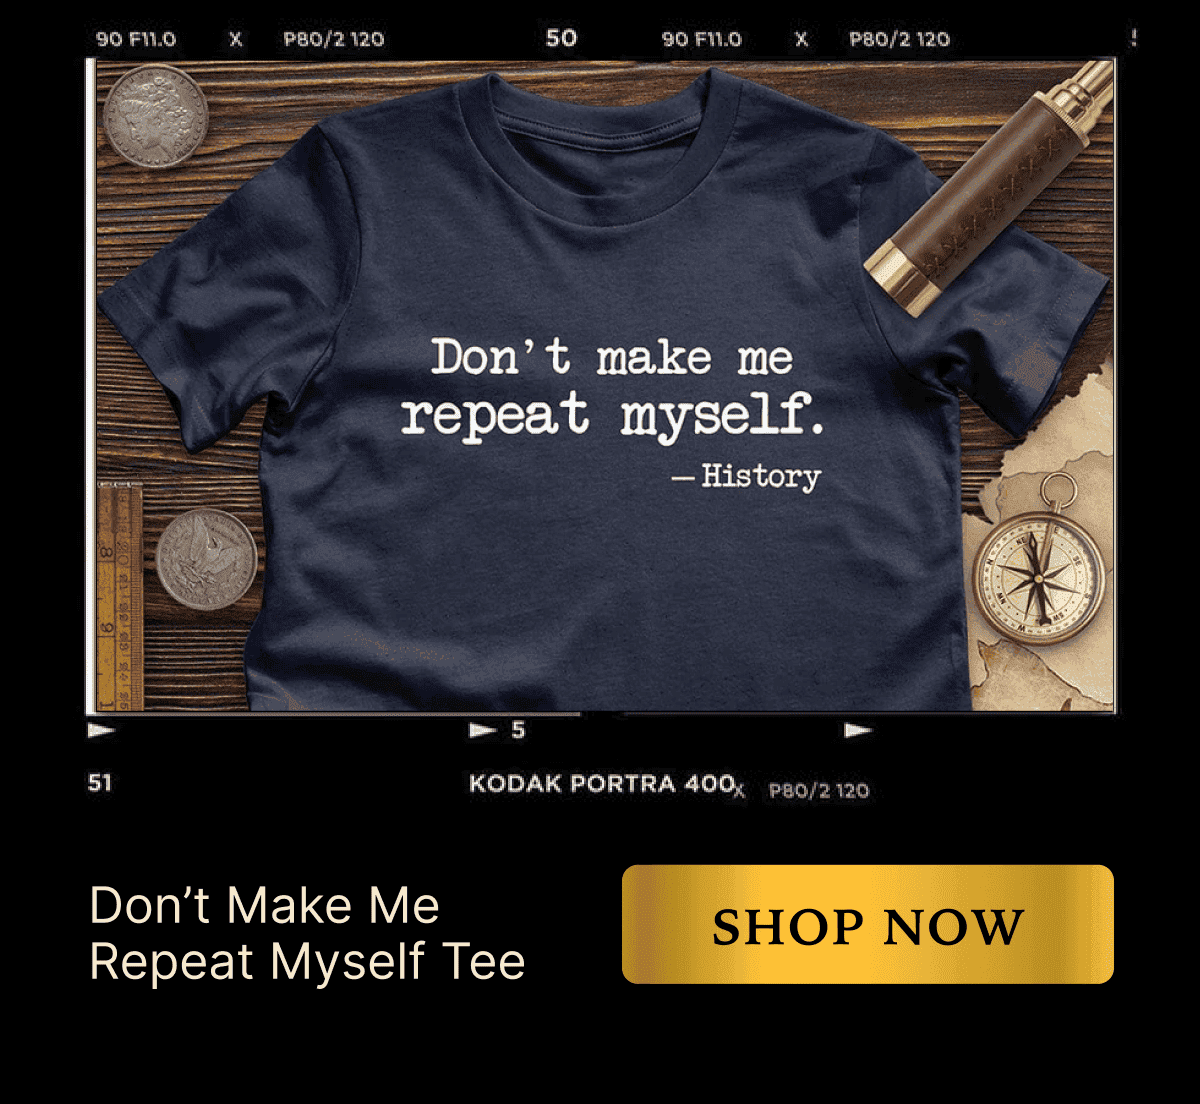 [Featured image of navy tee with a history quote]